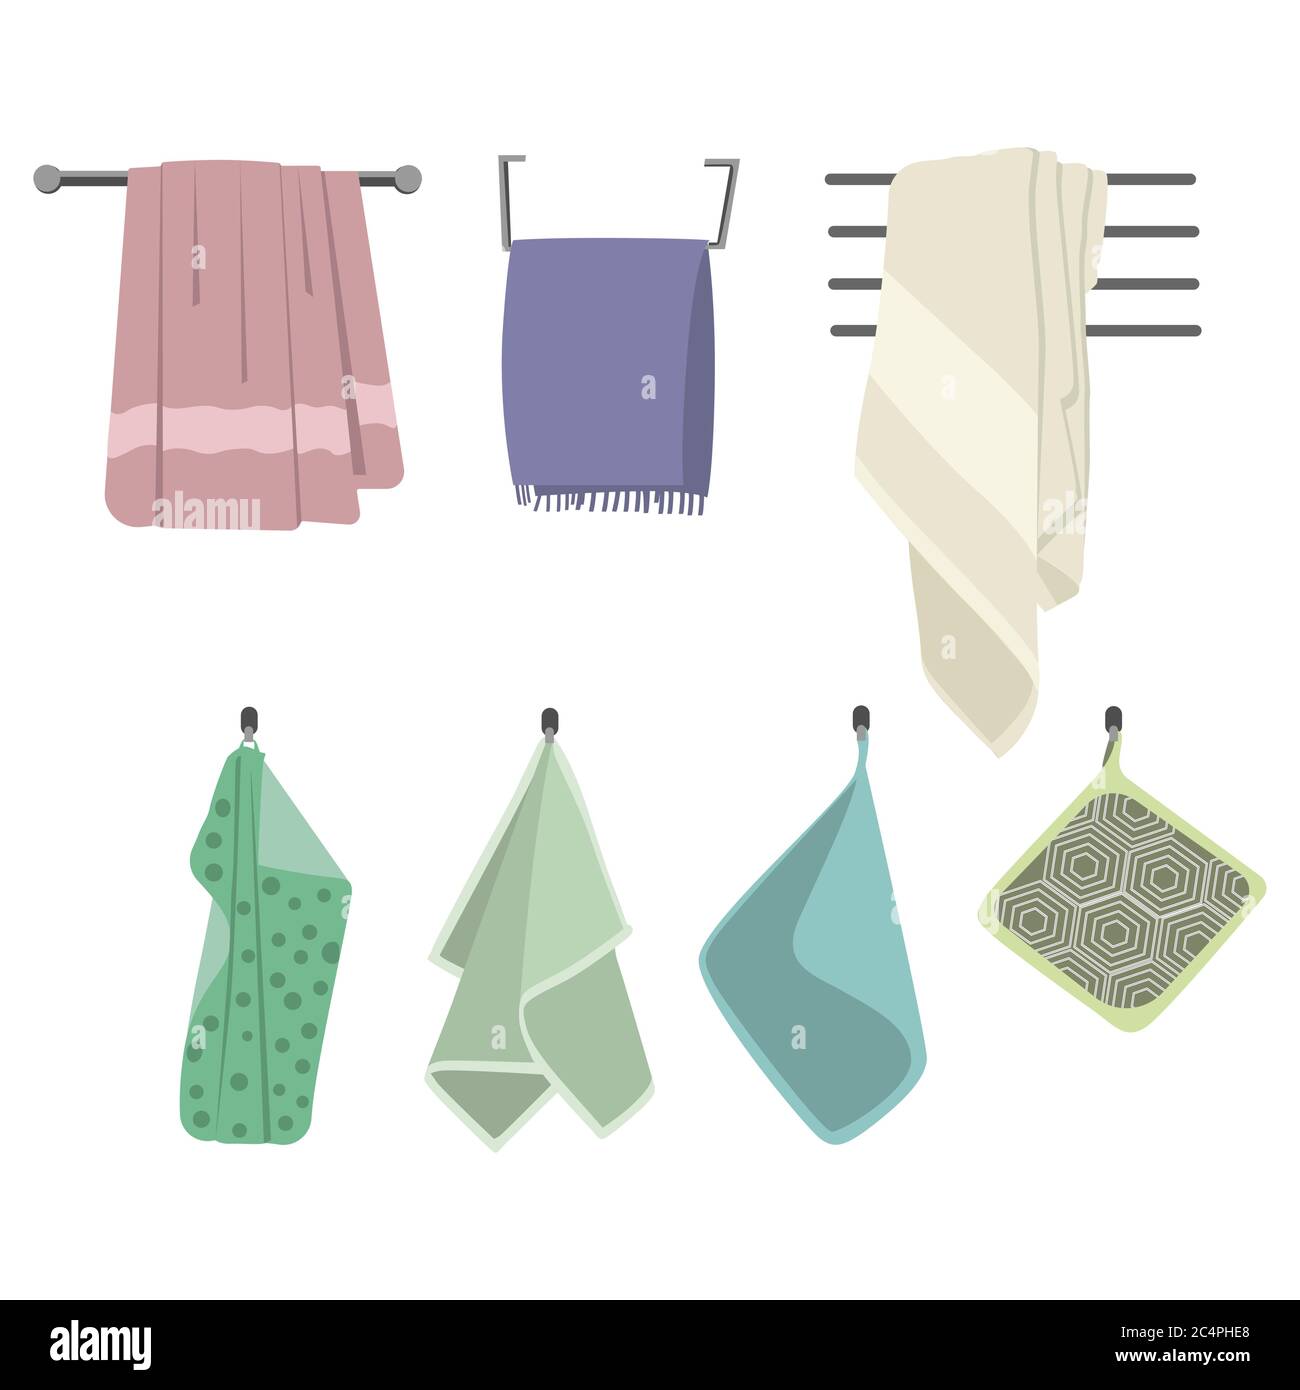 Towels hang on hook for kitchen or bathroom. Fabric wipe, fluffy towel for beauty spa salon, fresh microfiber for shower, domestic cotton, vector illu Stock Vector